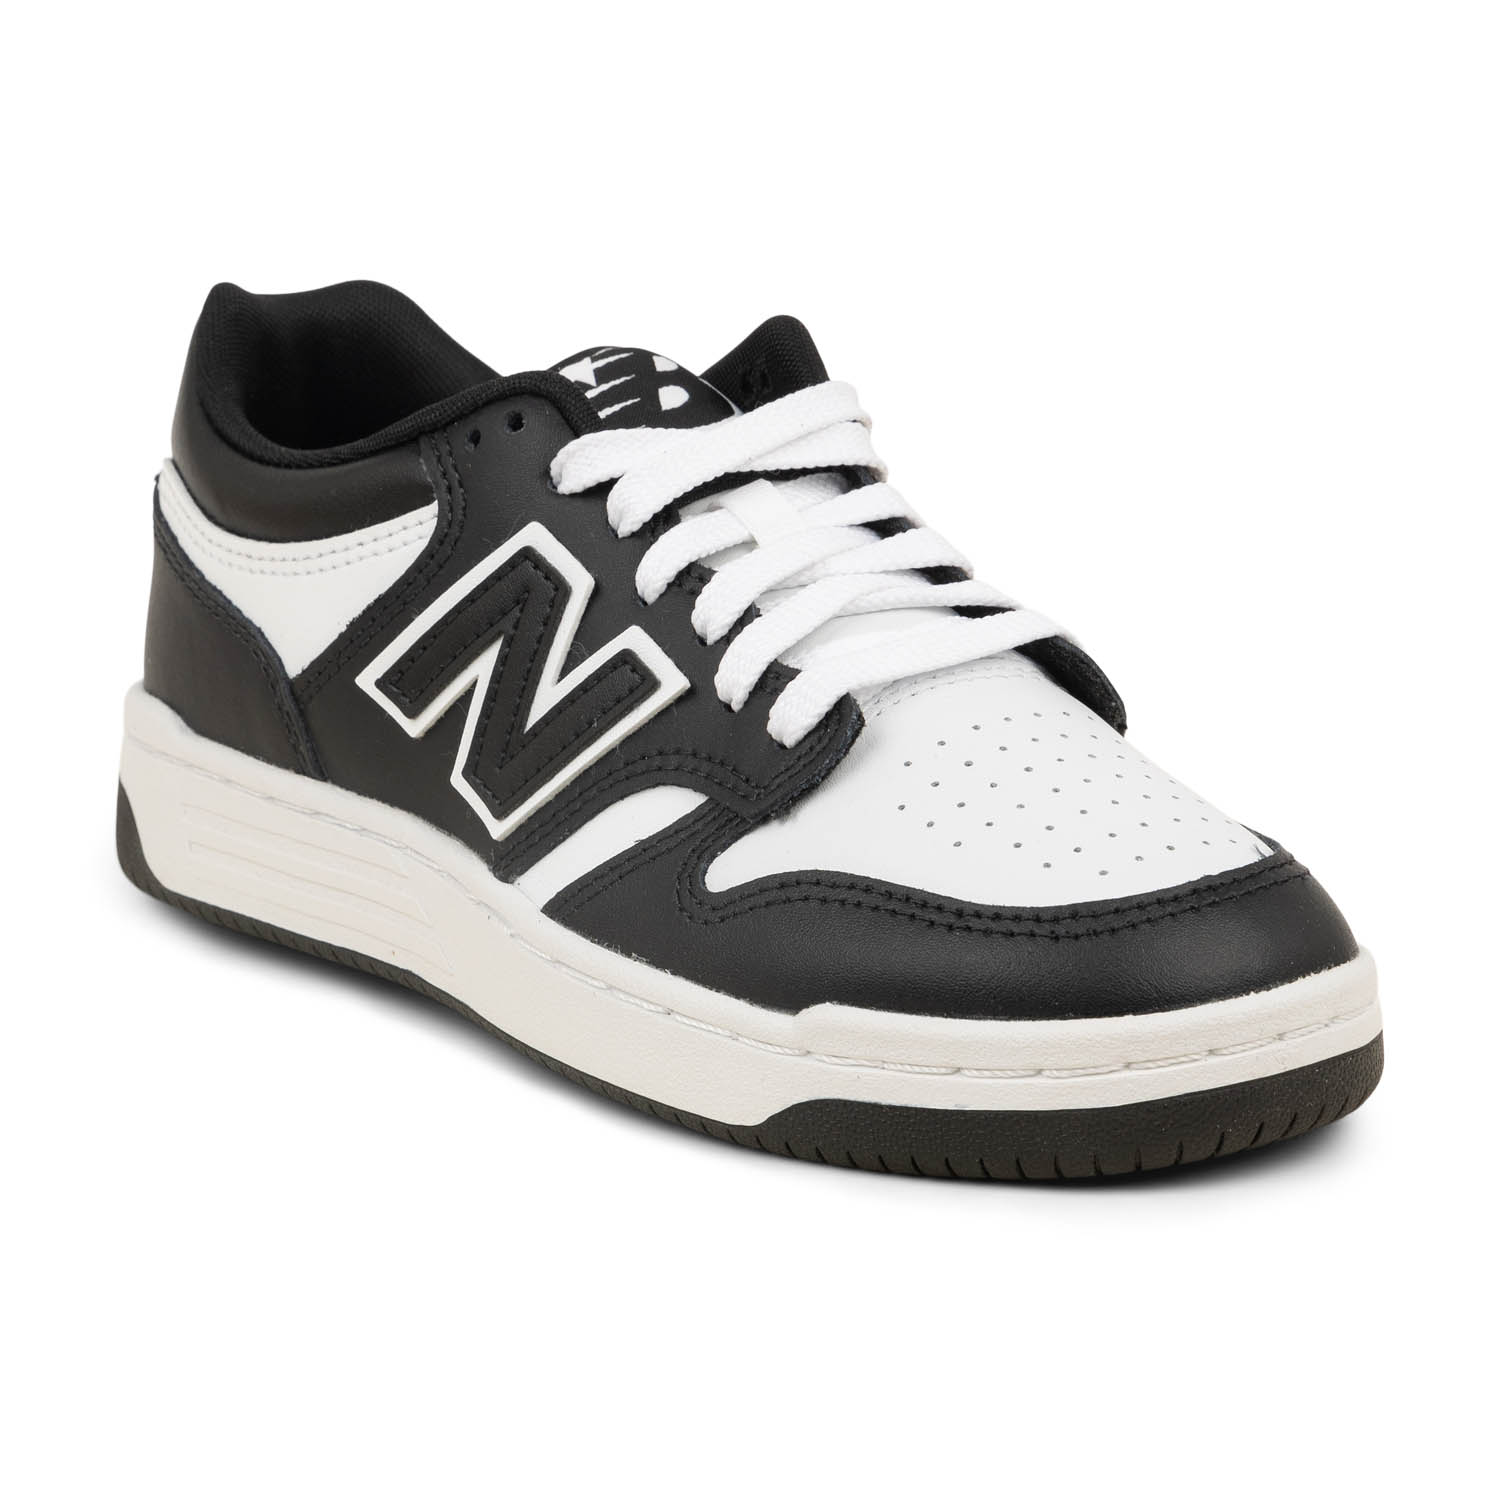 02 - 480 - NEW BALANCE -  - Synthétique